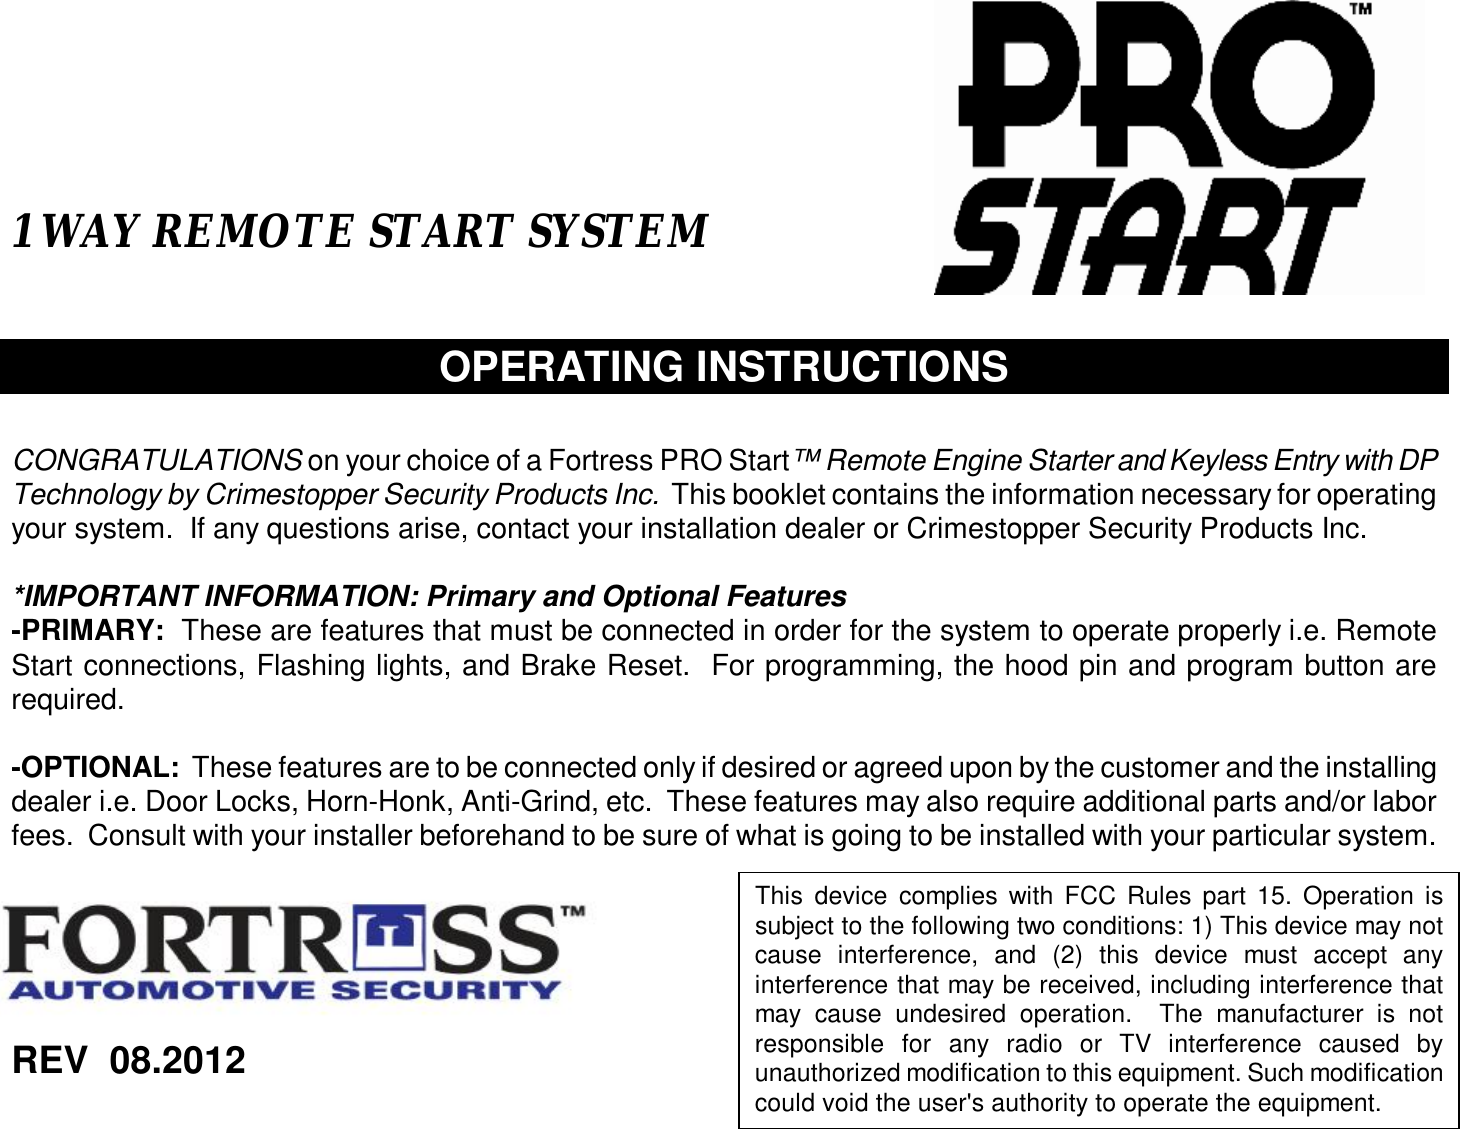   1 WAY REMOTE START SYSTEM    OPERATING INSTRUCTIONS   CONGRATULATIONS on your choice of a Fortress PRO Start™ Remote Engine Starter and Keyless Entry with DP Technology by Crimestopper Security Products Inc.  This booklet contains the information necessary for operating your system.  If any questions arise, contact your installation dealer or Crimestopper Security Products Inc.  *IMPORTANT INFORMATION: Primary and Optional Features -PRIMARY:  These are features that must be connected in order for the system to operate properly i.e. Remote Start connections, Flashing lights, and Brake Reset.  For programming, the hood pin and program button are required.  -OPTIONAL:  These features are to be connected only if desired or agreed upon by the customer and the installing dealer i.e. Door Locks, Horn-Honk, Anti-Grind, etc.  These features may also require additional parts and/or labor fees.  Consult with your installer beforehand to be sure of what is going to be installed with your particular system.         REV  08.2012    This device complies with FCC Rules part 15. Operation is subject to the following two conditions: 1) This device may not cause interference, and (2) this device must accept any interference that may be received, including interference that may cause undesired operation.  The manufacturer is not responsible for any radio or TV interference caused by unauthorized modification to this equipment. Such modification could void the user&apos;s authority to operate the equipment.   